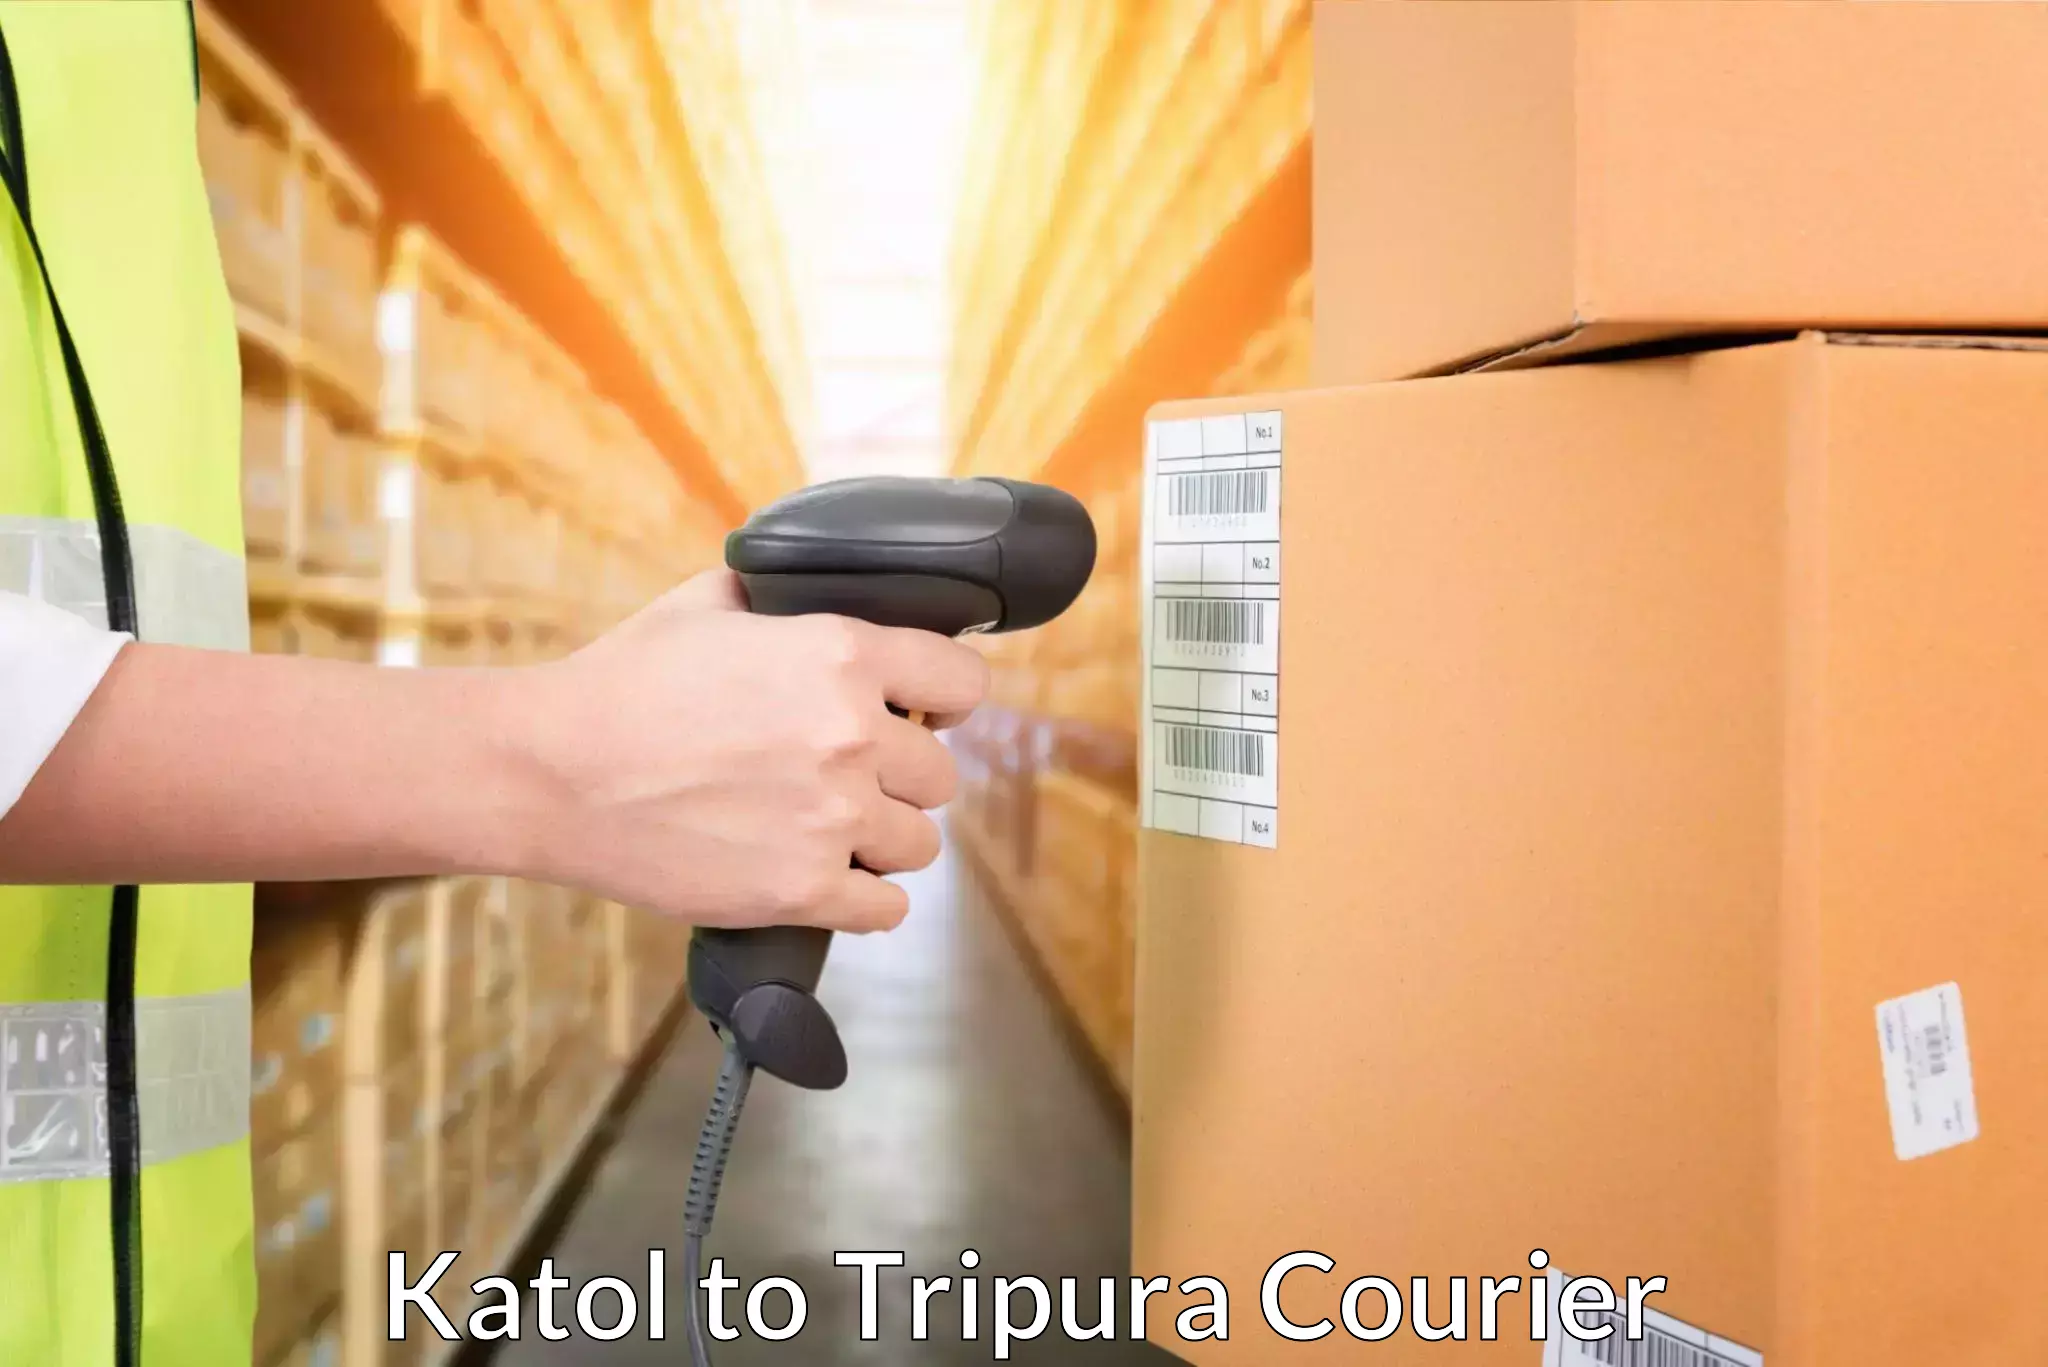 Business delivery service Katol to Tripura